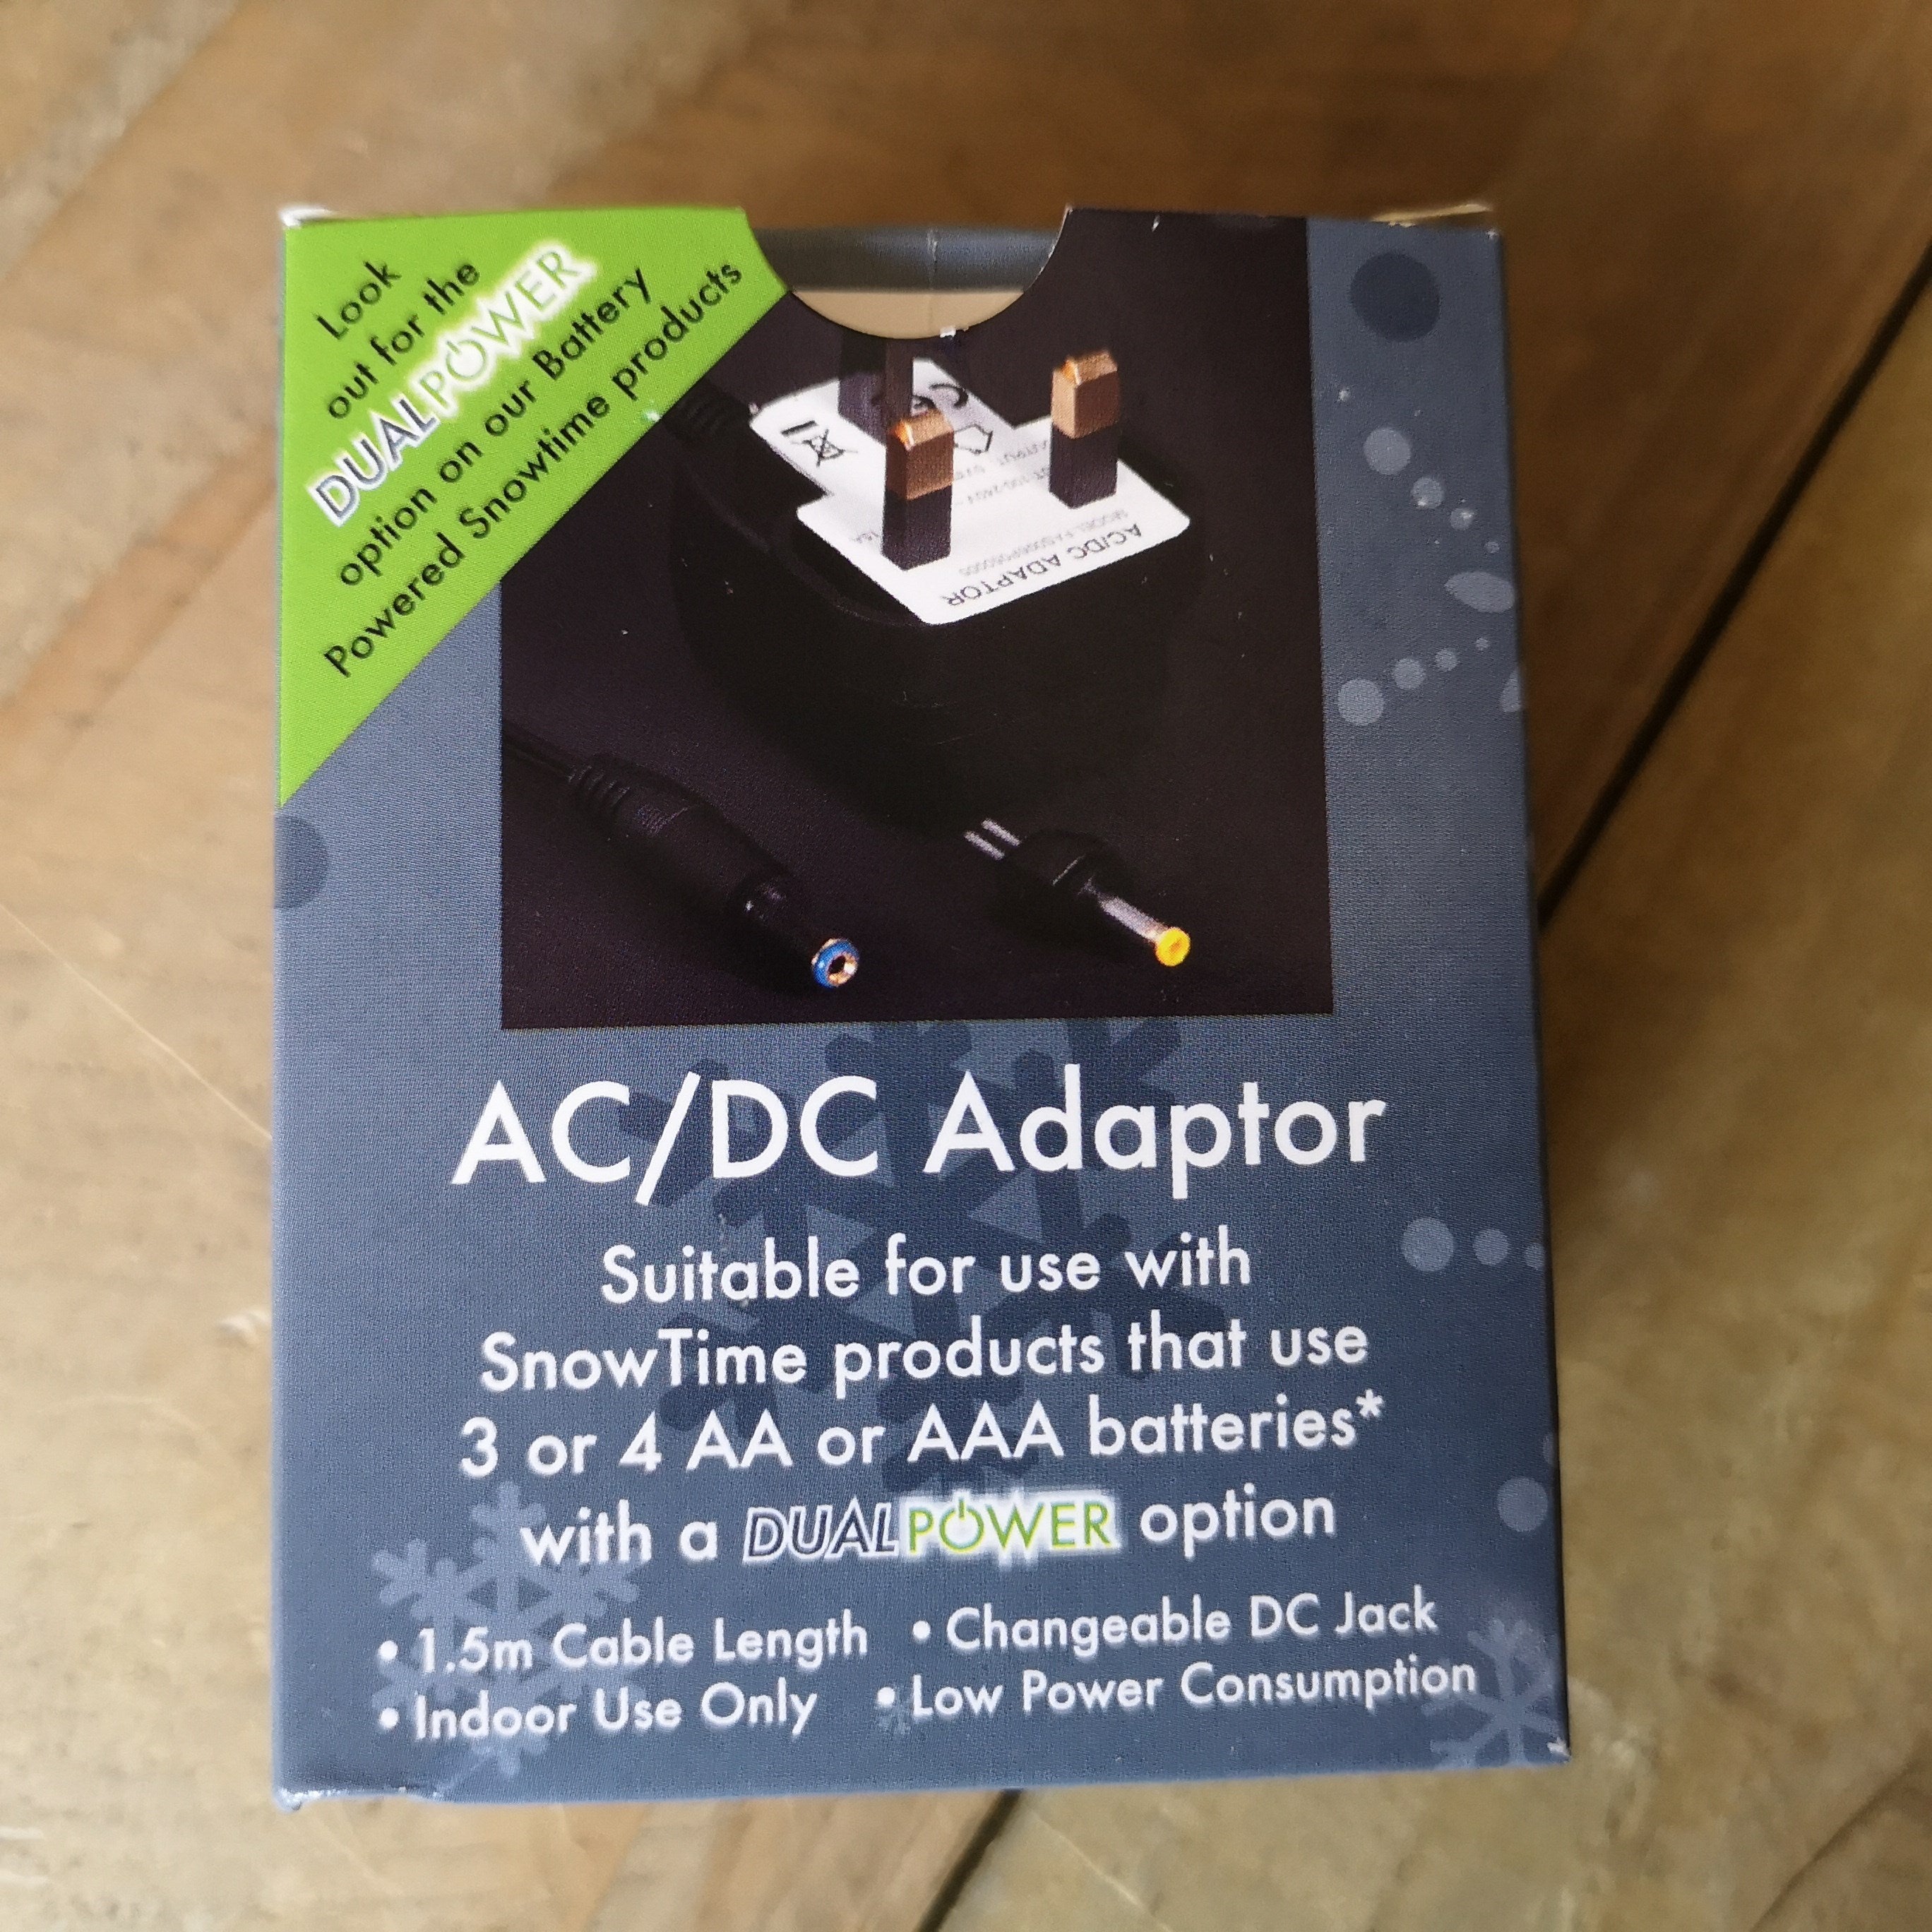 AC/DC Power Mains Adaptor CL05923 for use with Snowtime Water Spinners